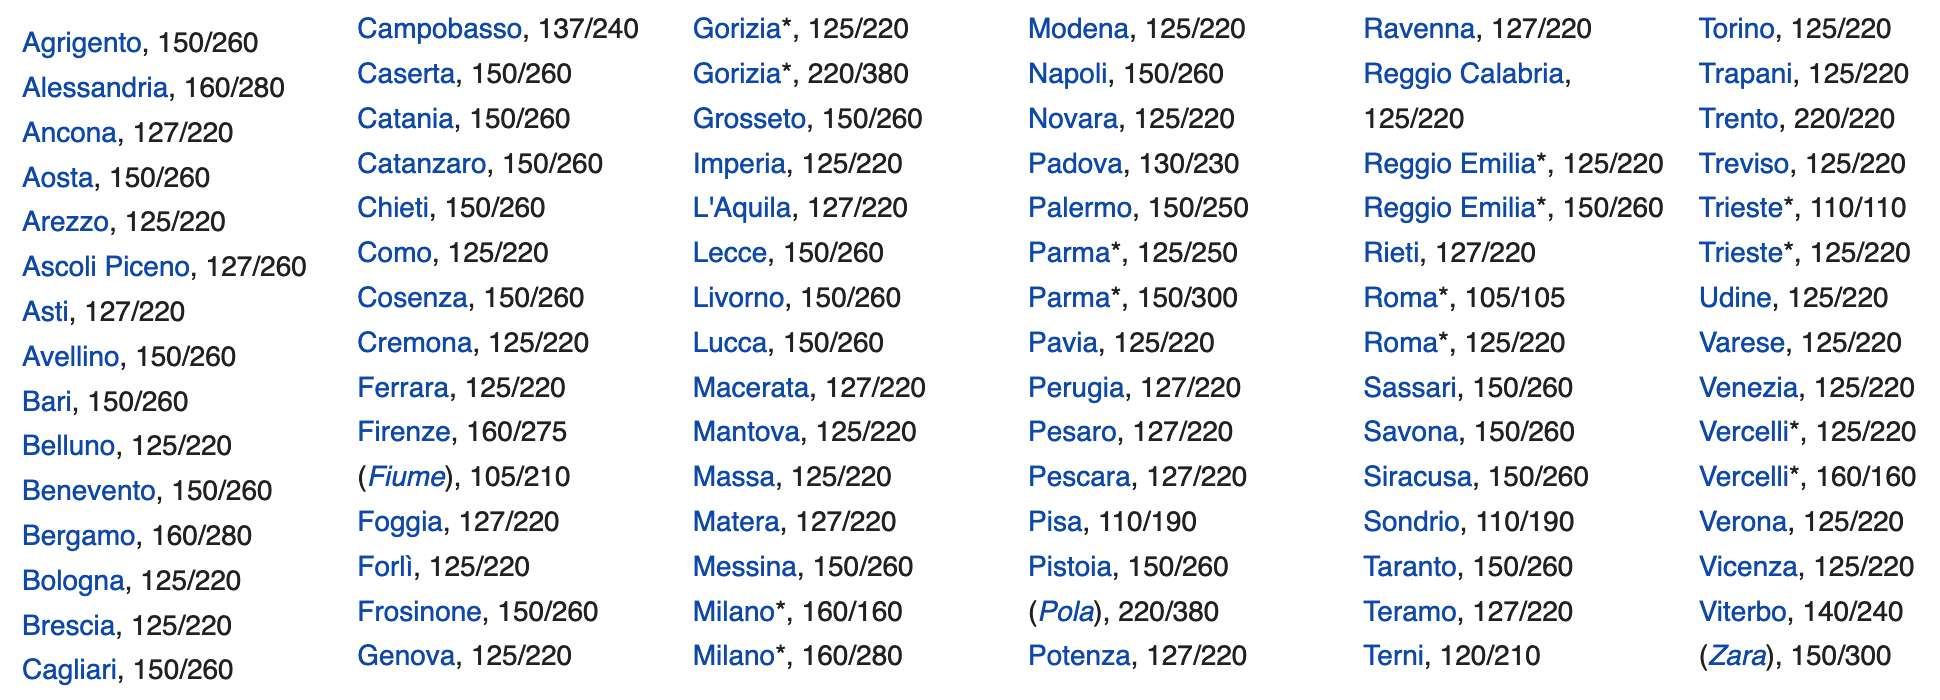 A list of the various line voltages in use in the major towns and cities Italy before their unification. The voltages can vary quite widely, for example Terni is listed as using 120/210V, whereas Frosinone used 150/260V. Additionally, some towns are listed twice, as they were served by two different power companies.